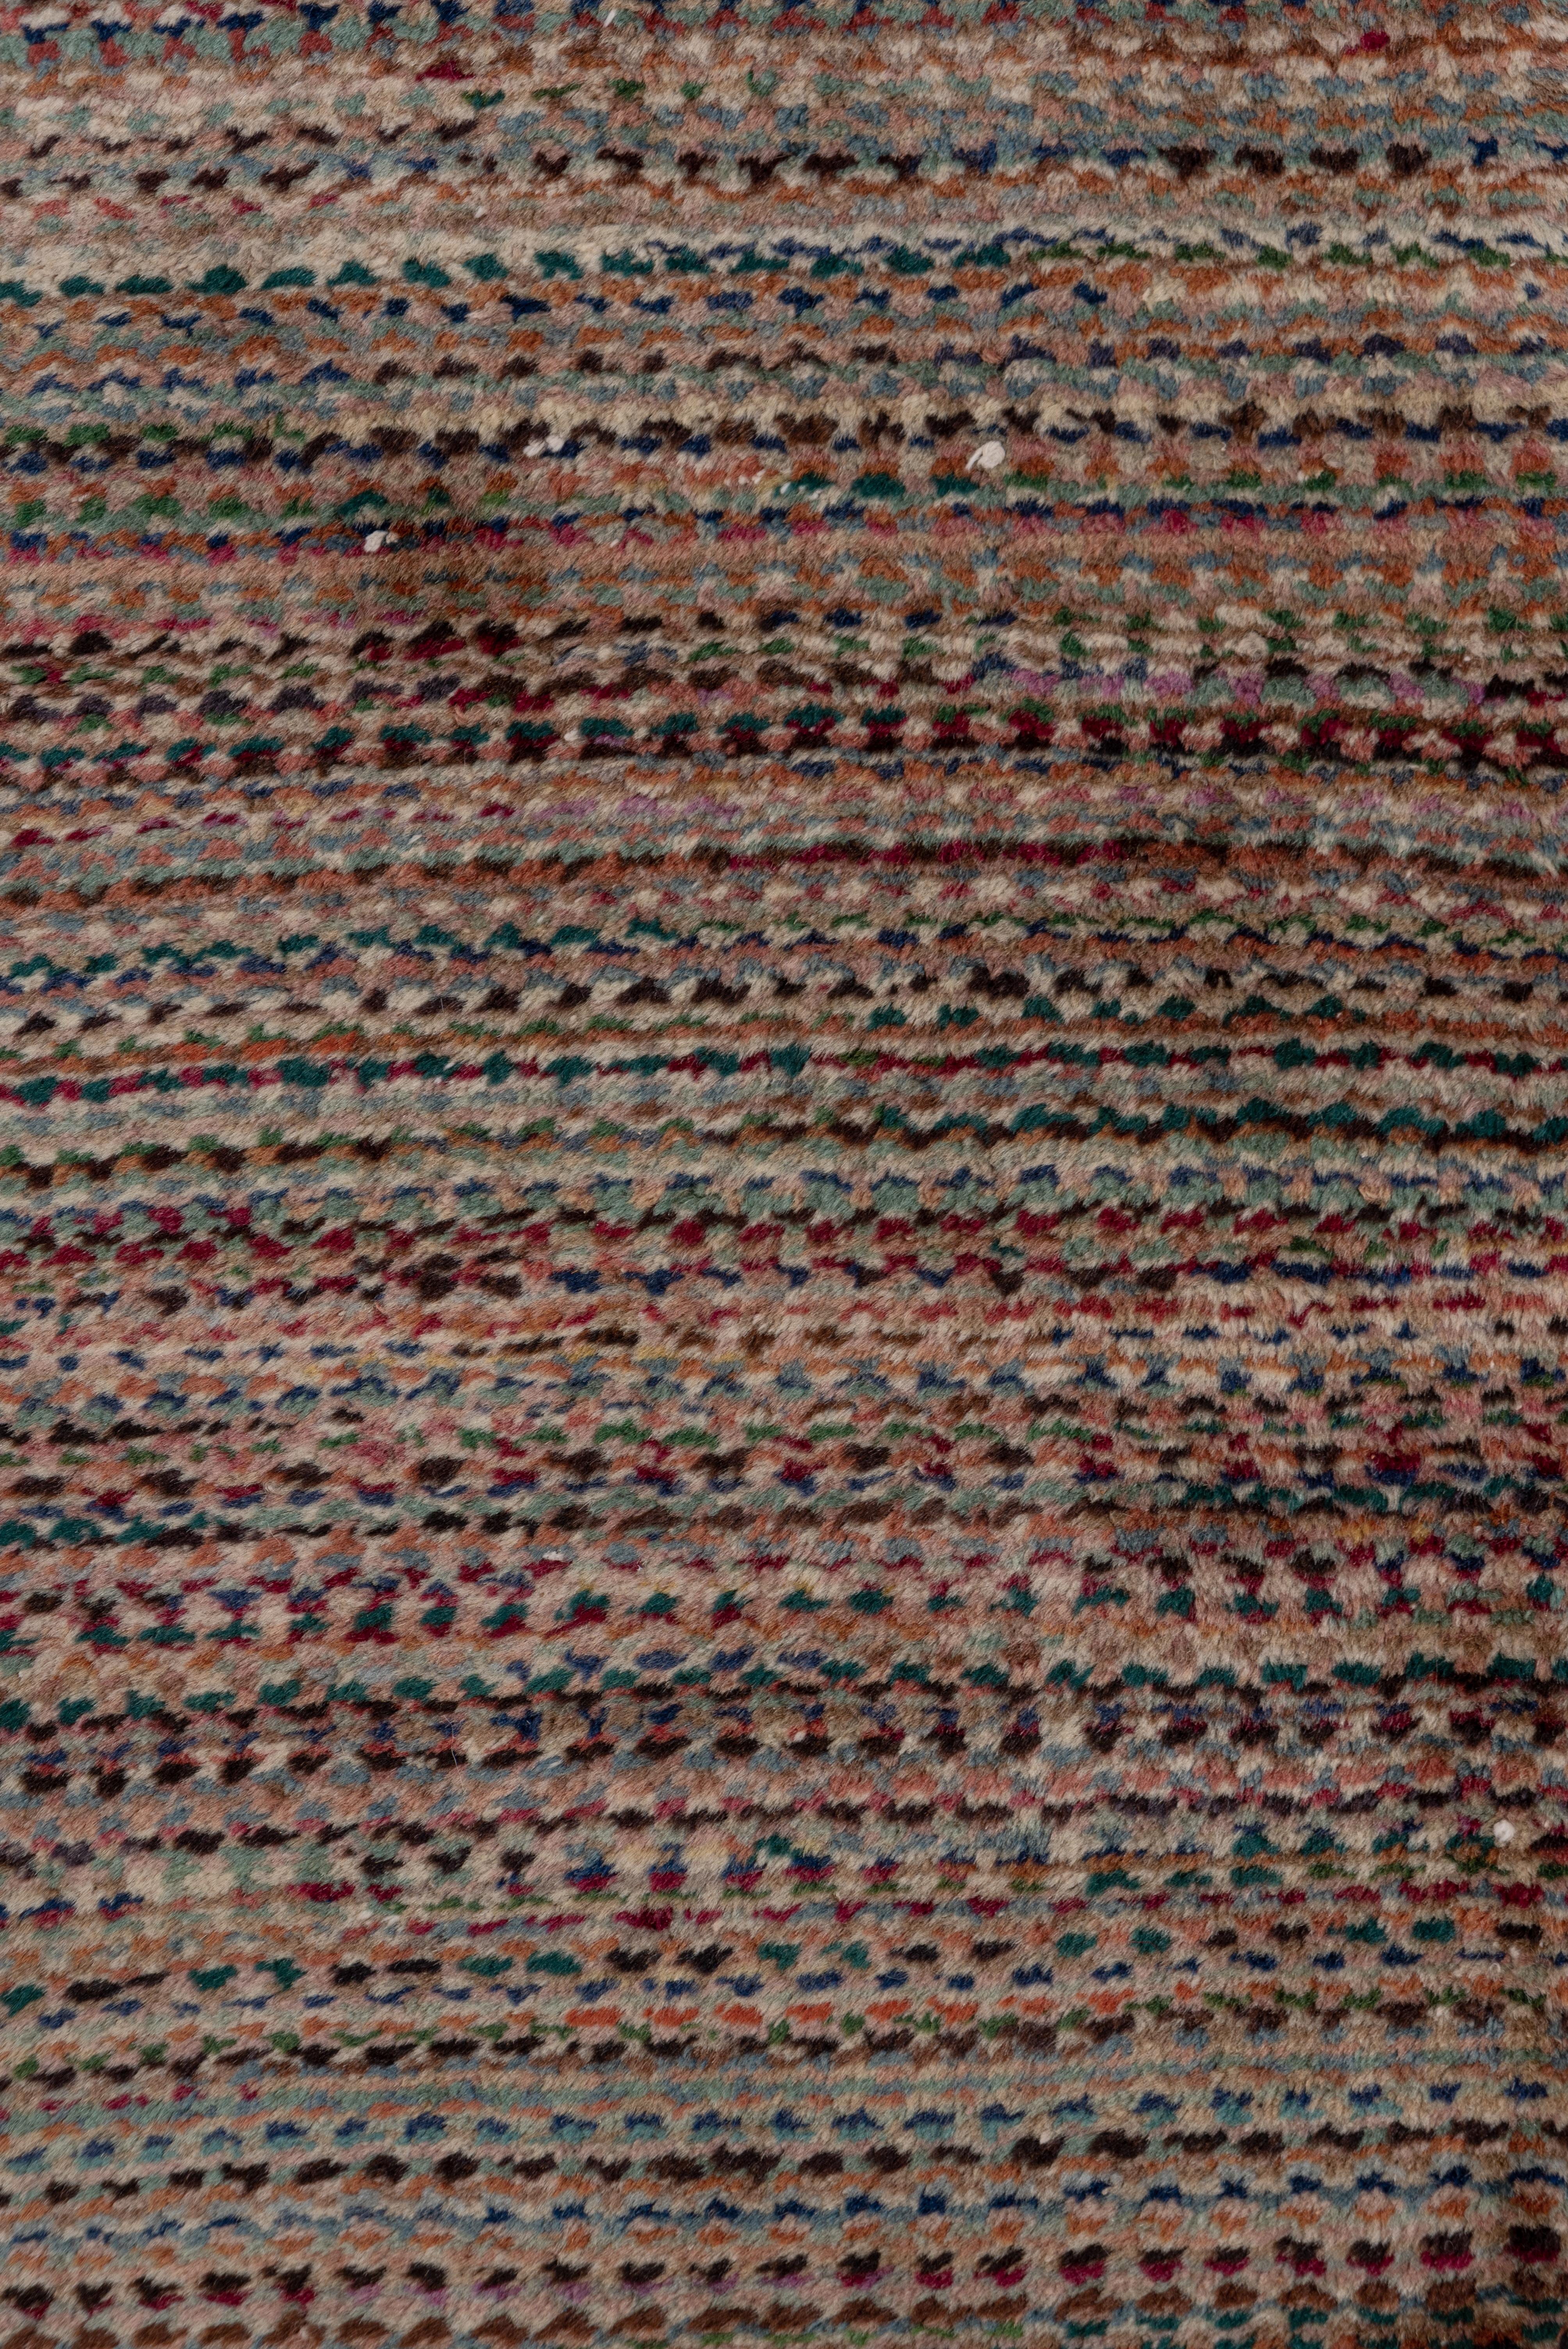 Hand-Knotted Colorful Narrow Antique Turkish Runner, Interwar Period